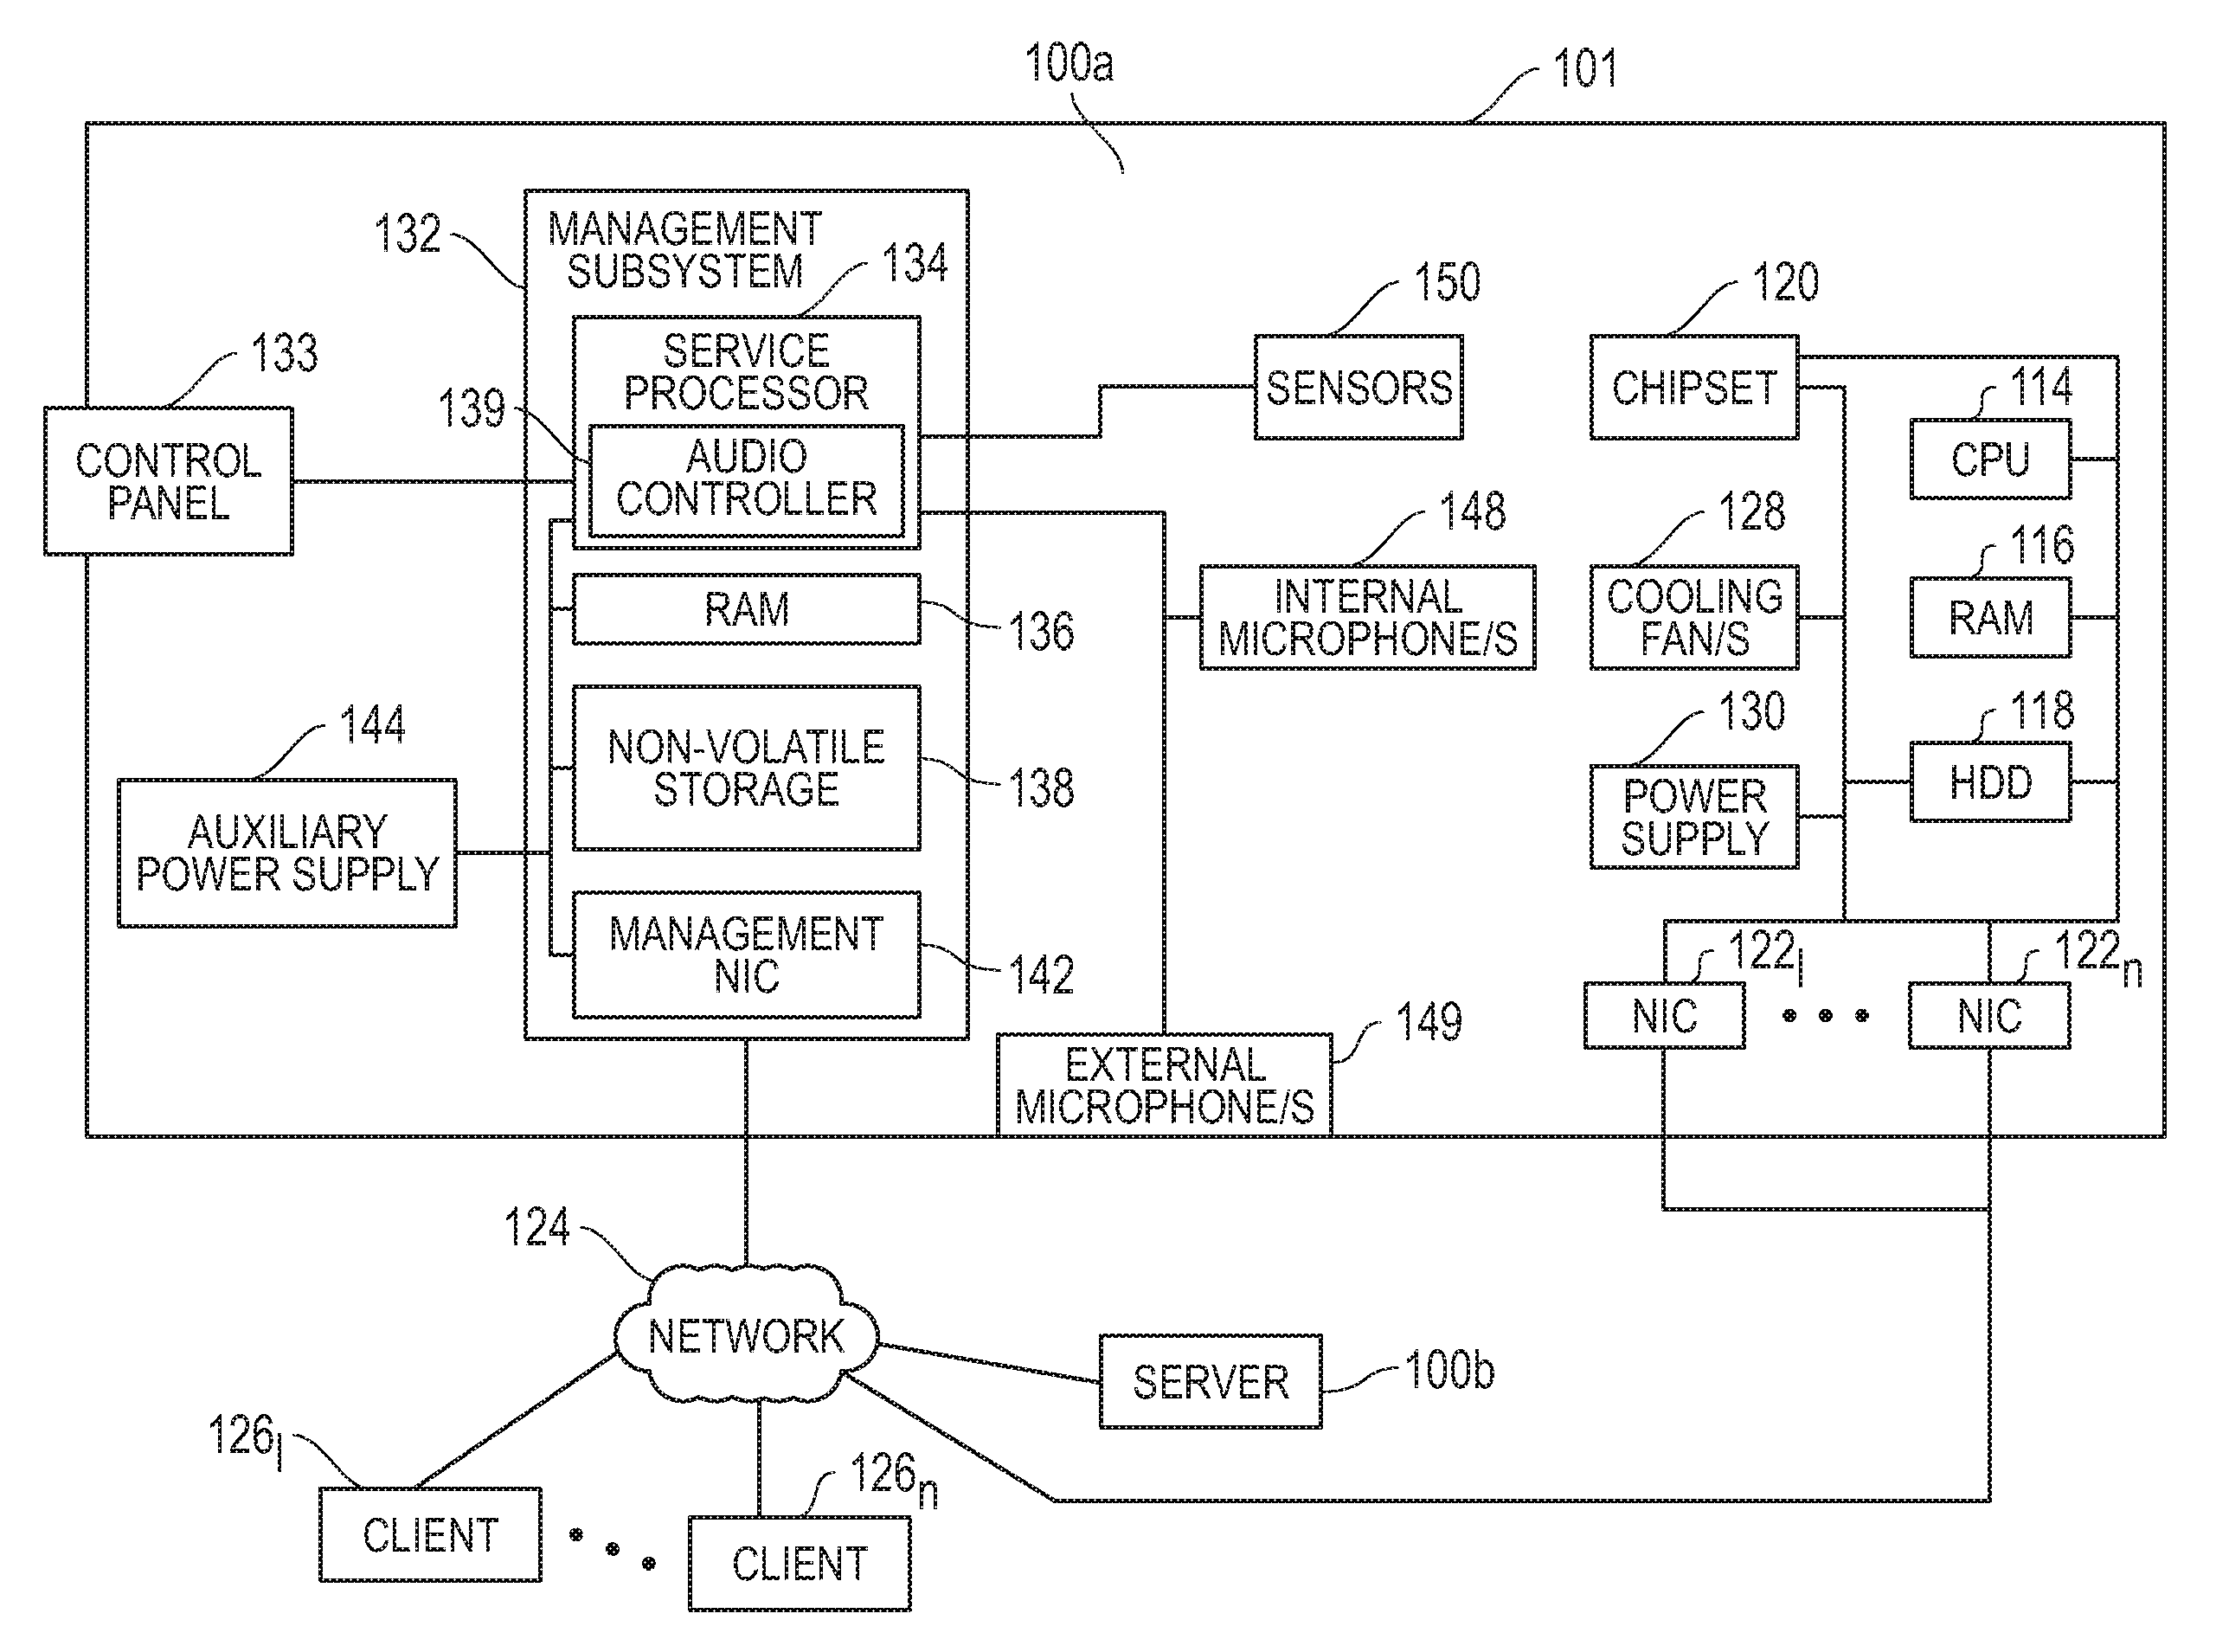 Systems and methods for local and remote recording, monitoring, control and/or analysis of sounds generated in information handling system environments